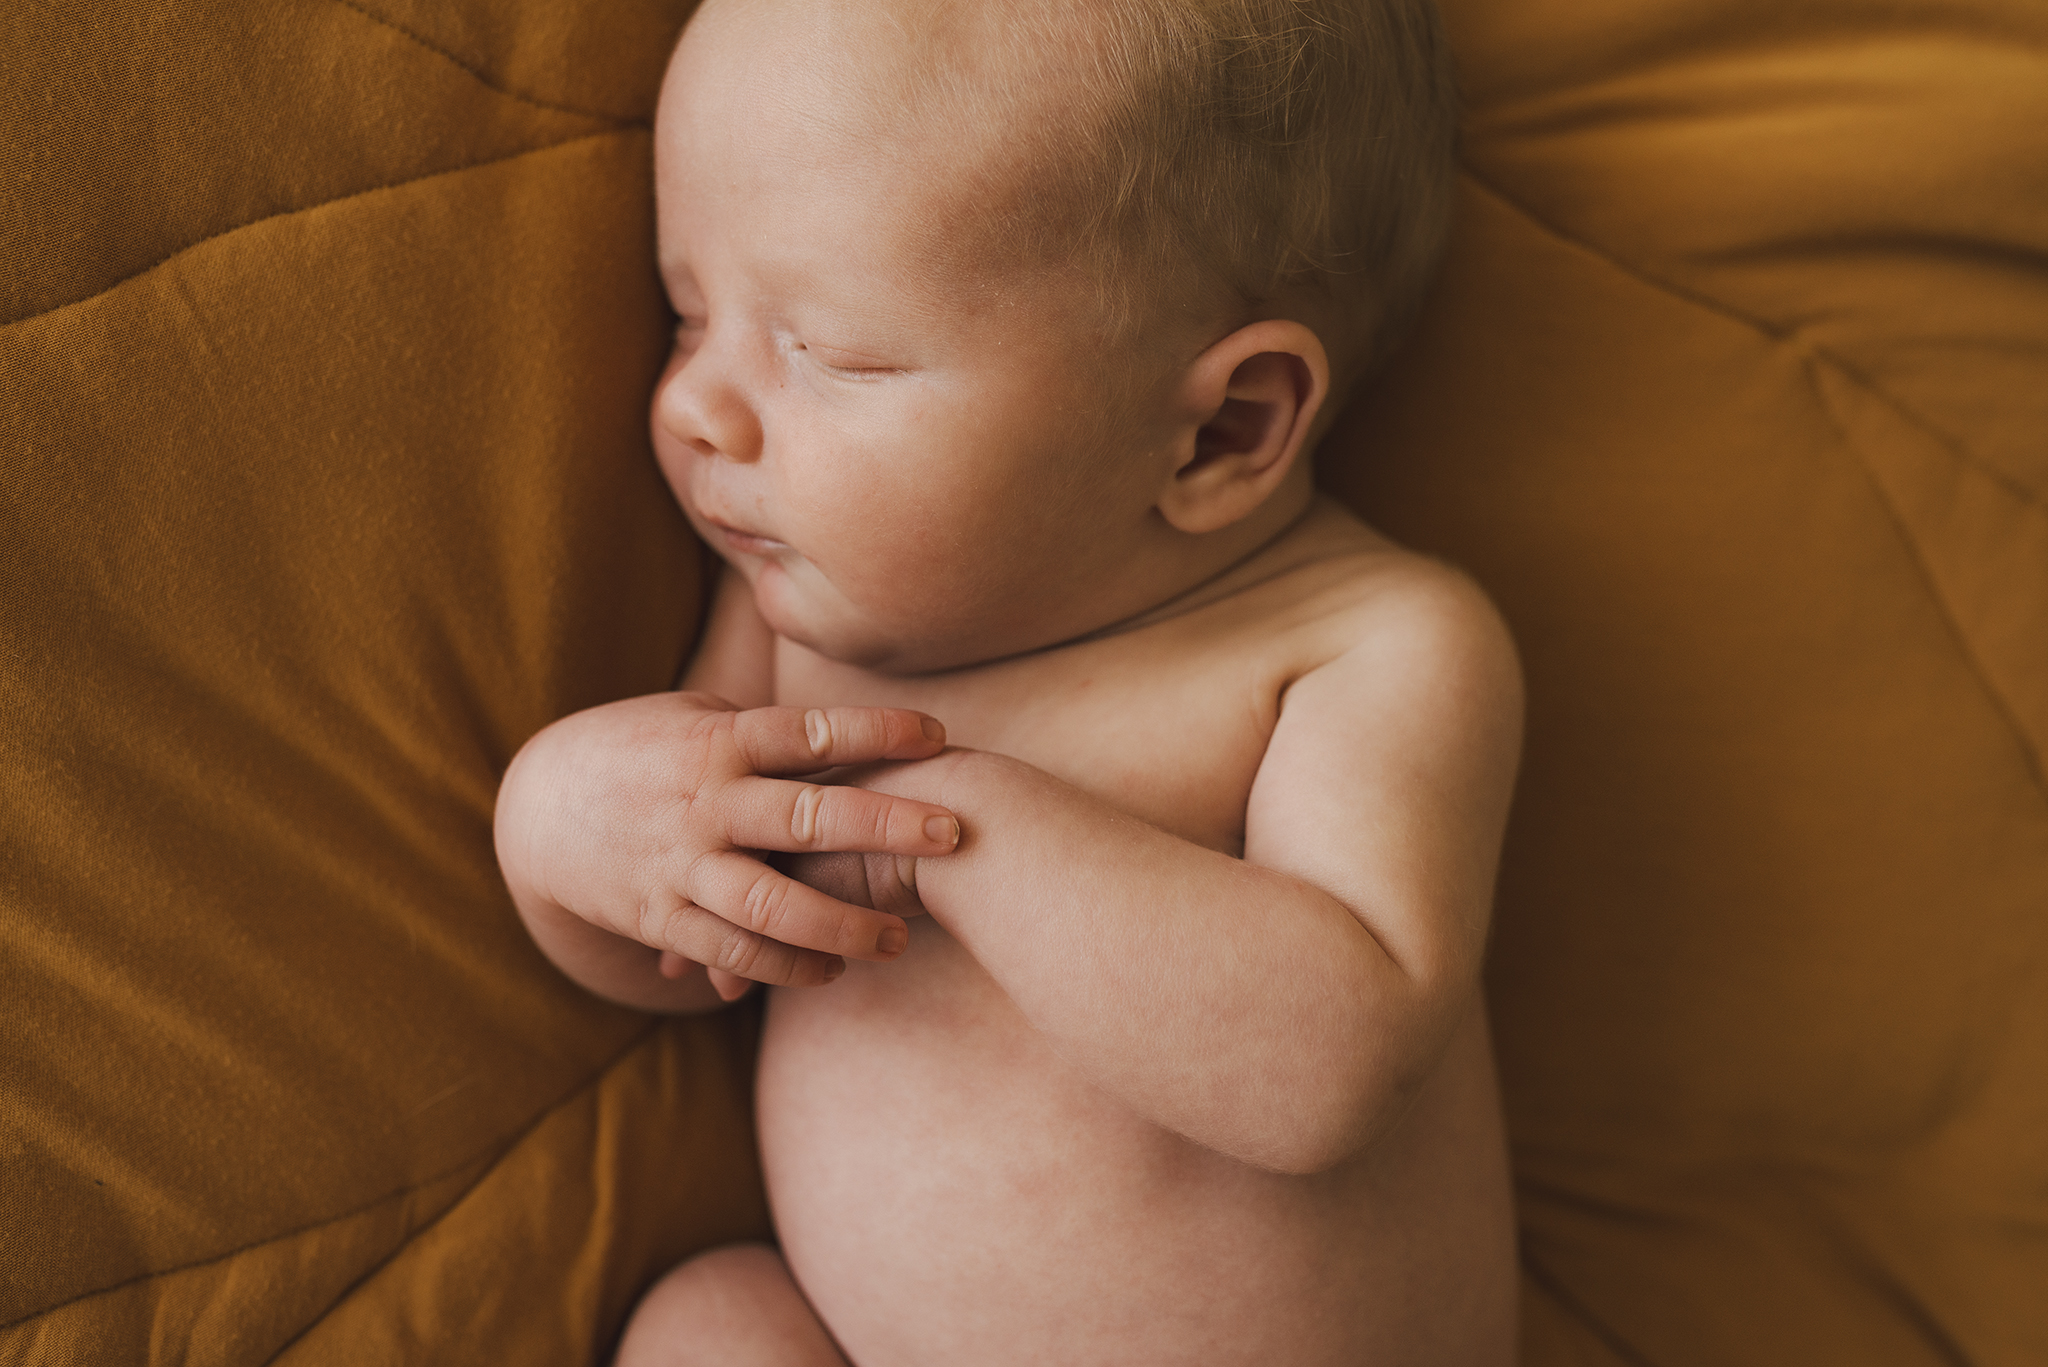 A close up of a newborn baby, laying asleep on a yellow blanket with his hands clasped together on his chest.